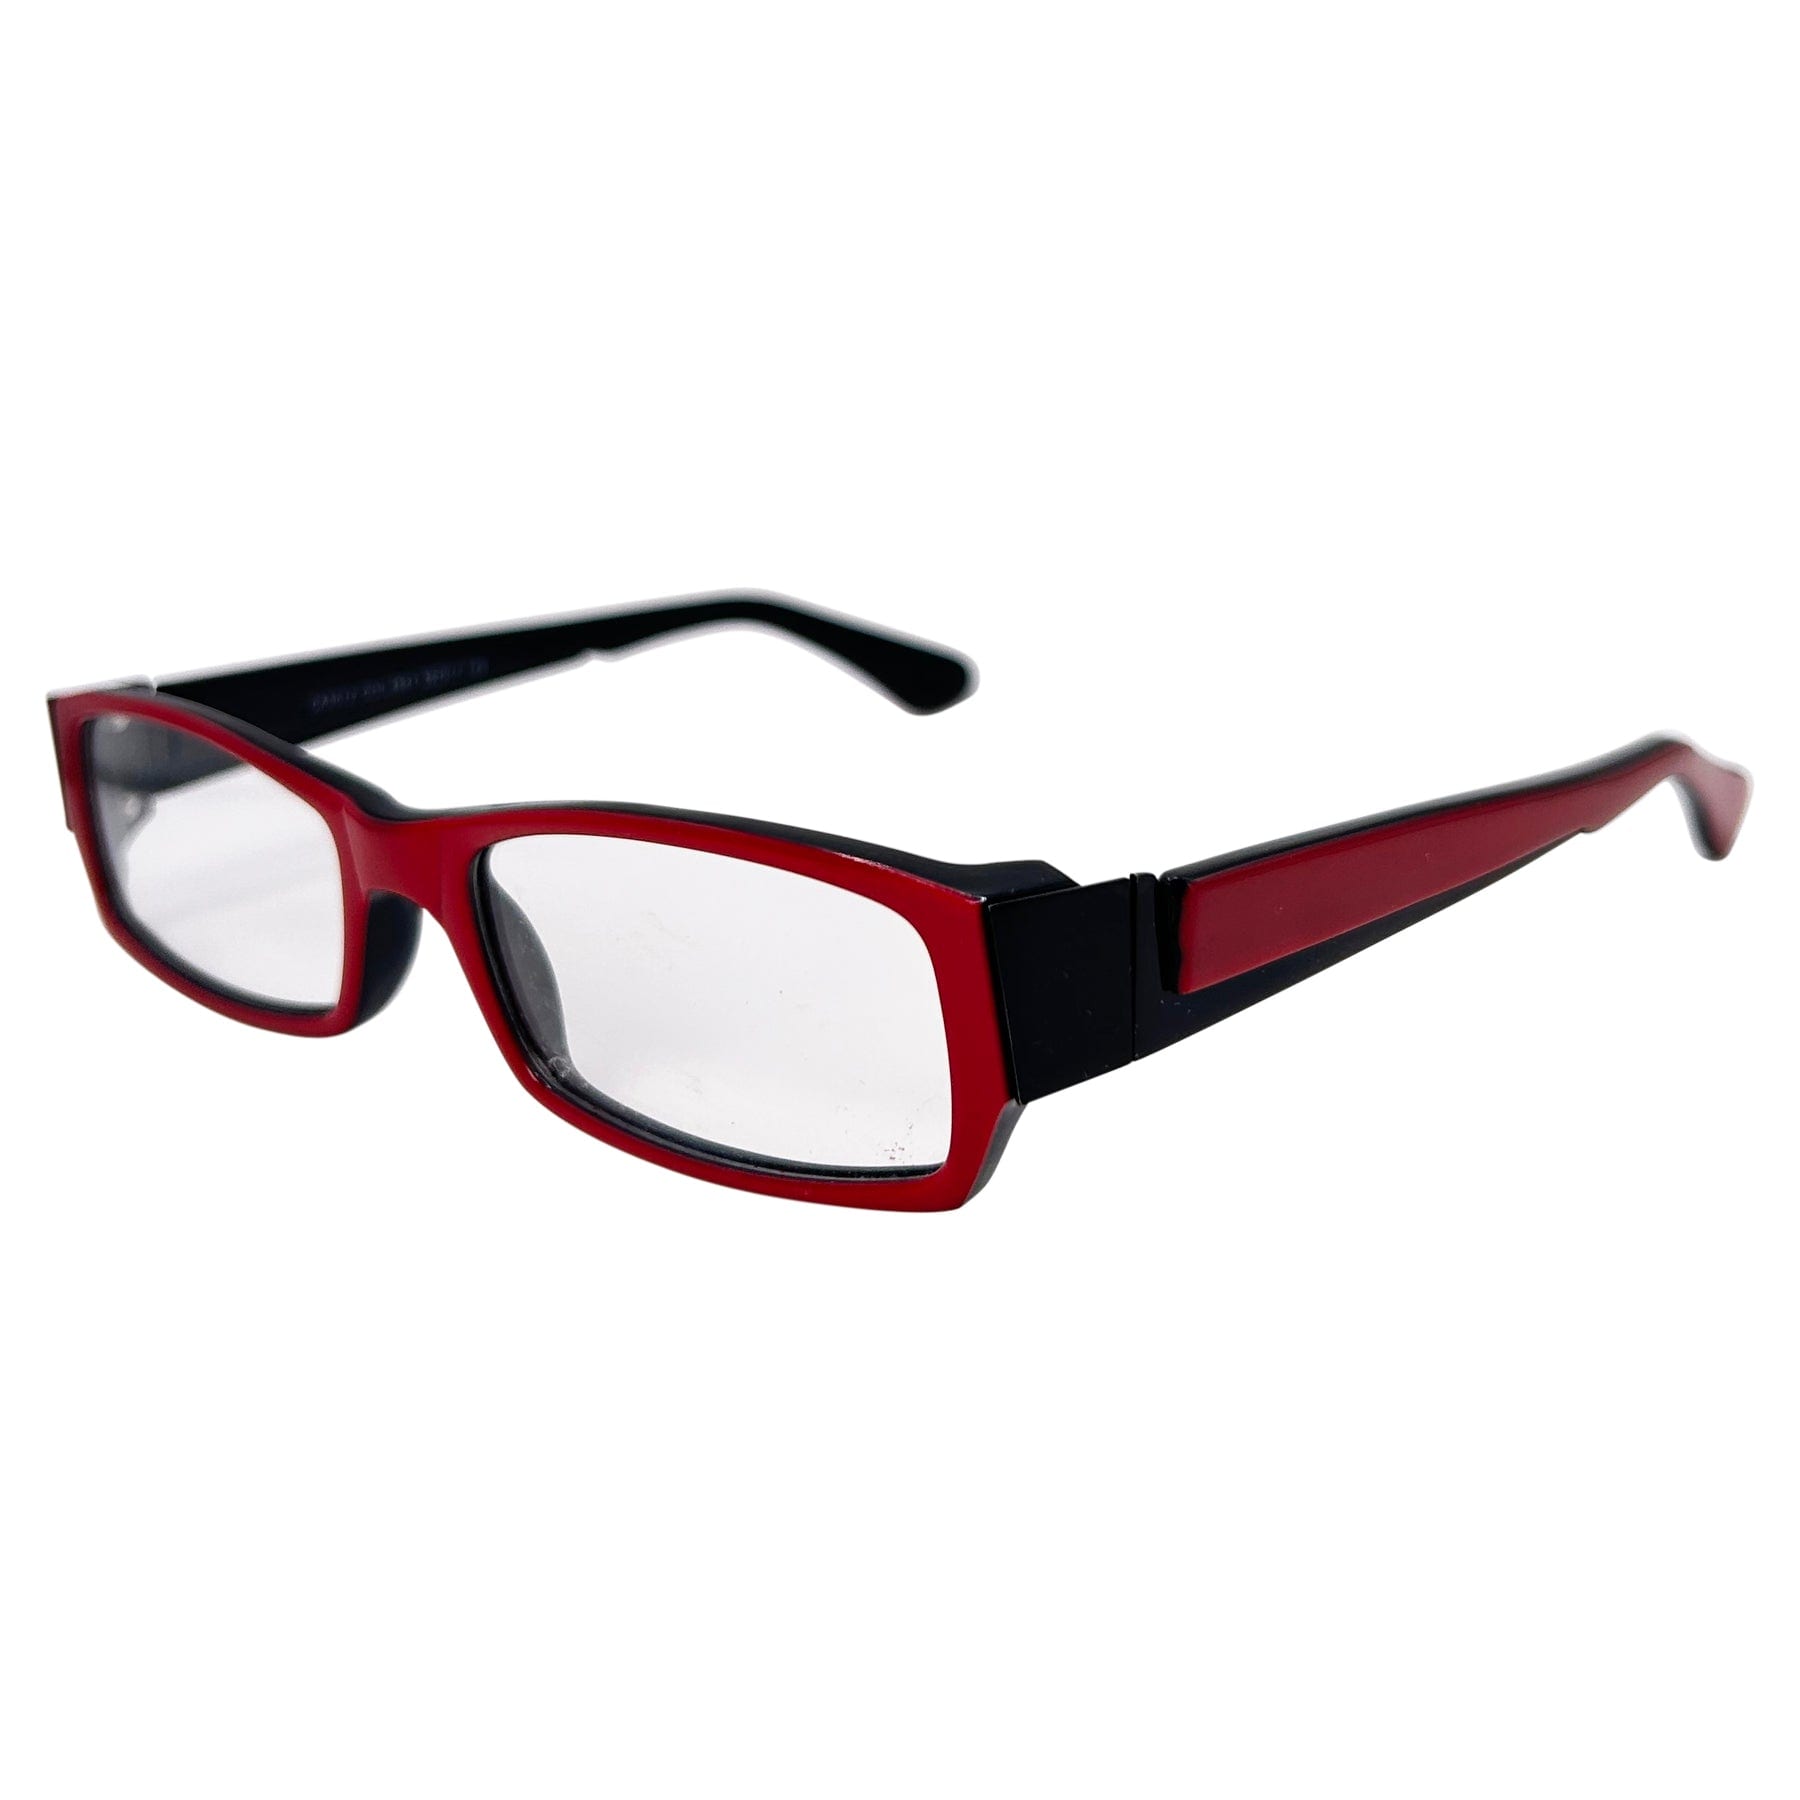 square red colored glasses with a 90s style frame